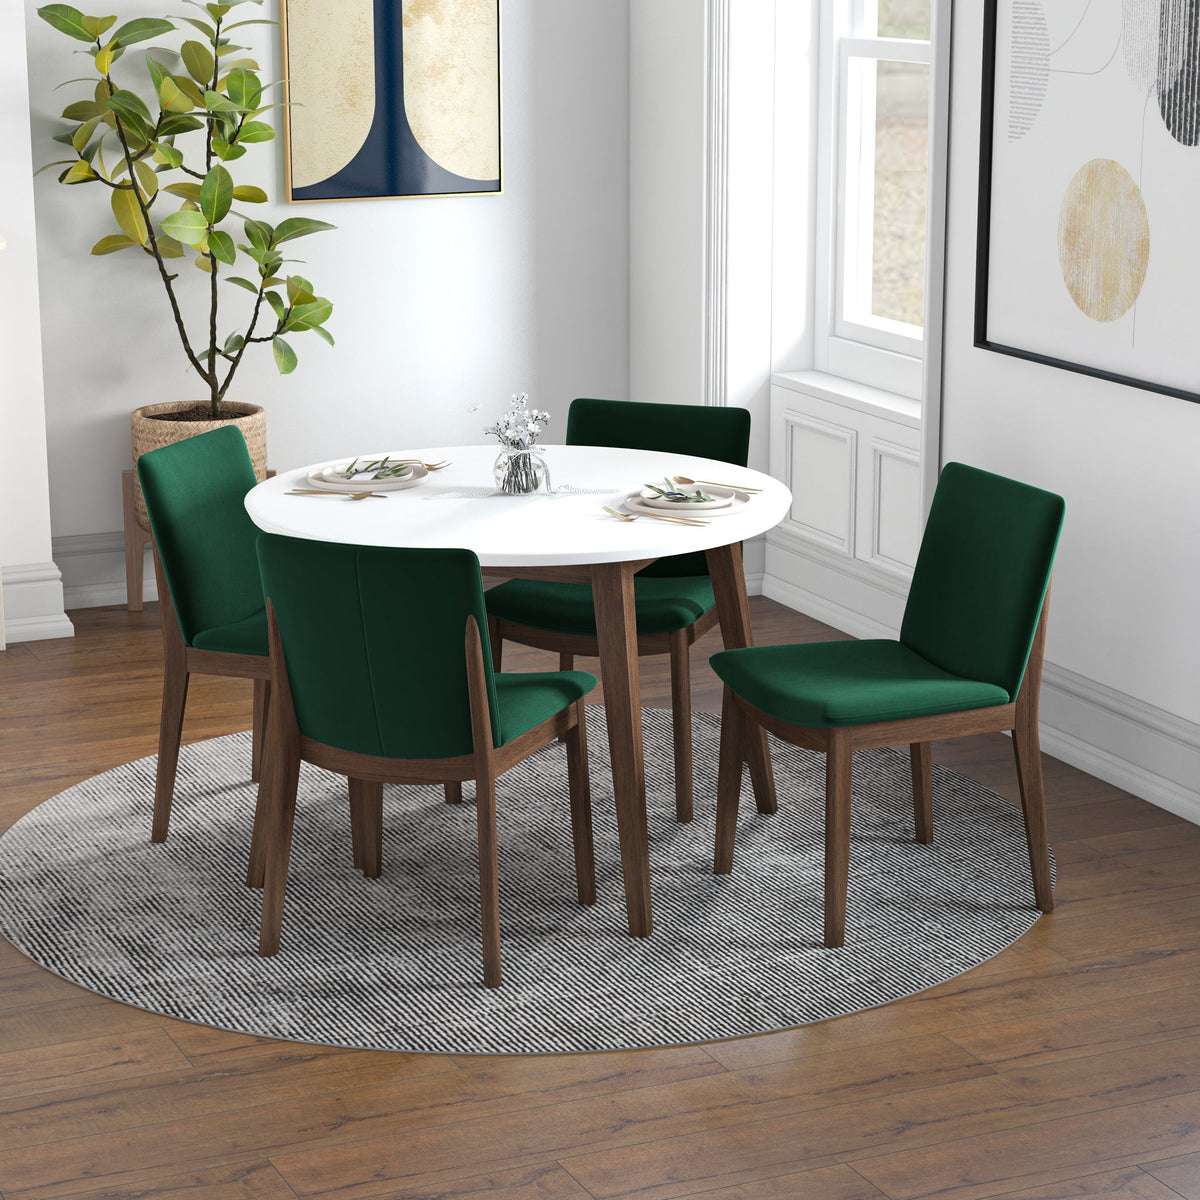 Palmer White Dining Set - 4 Virginia Green Chairs | MidinMod | TX | Best Furniture stores in Houston